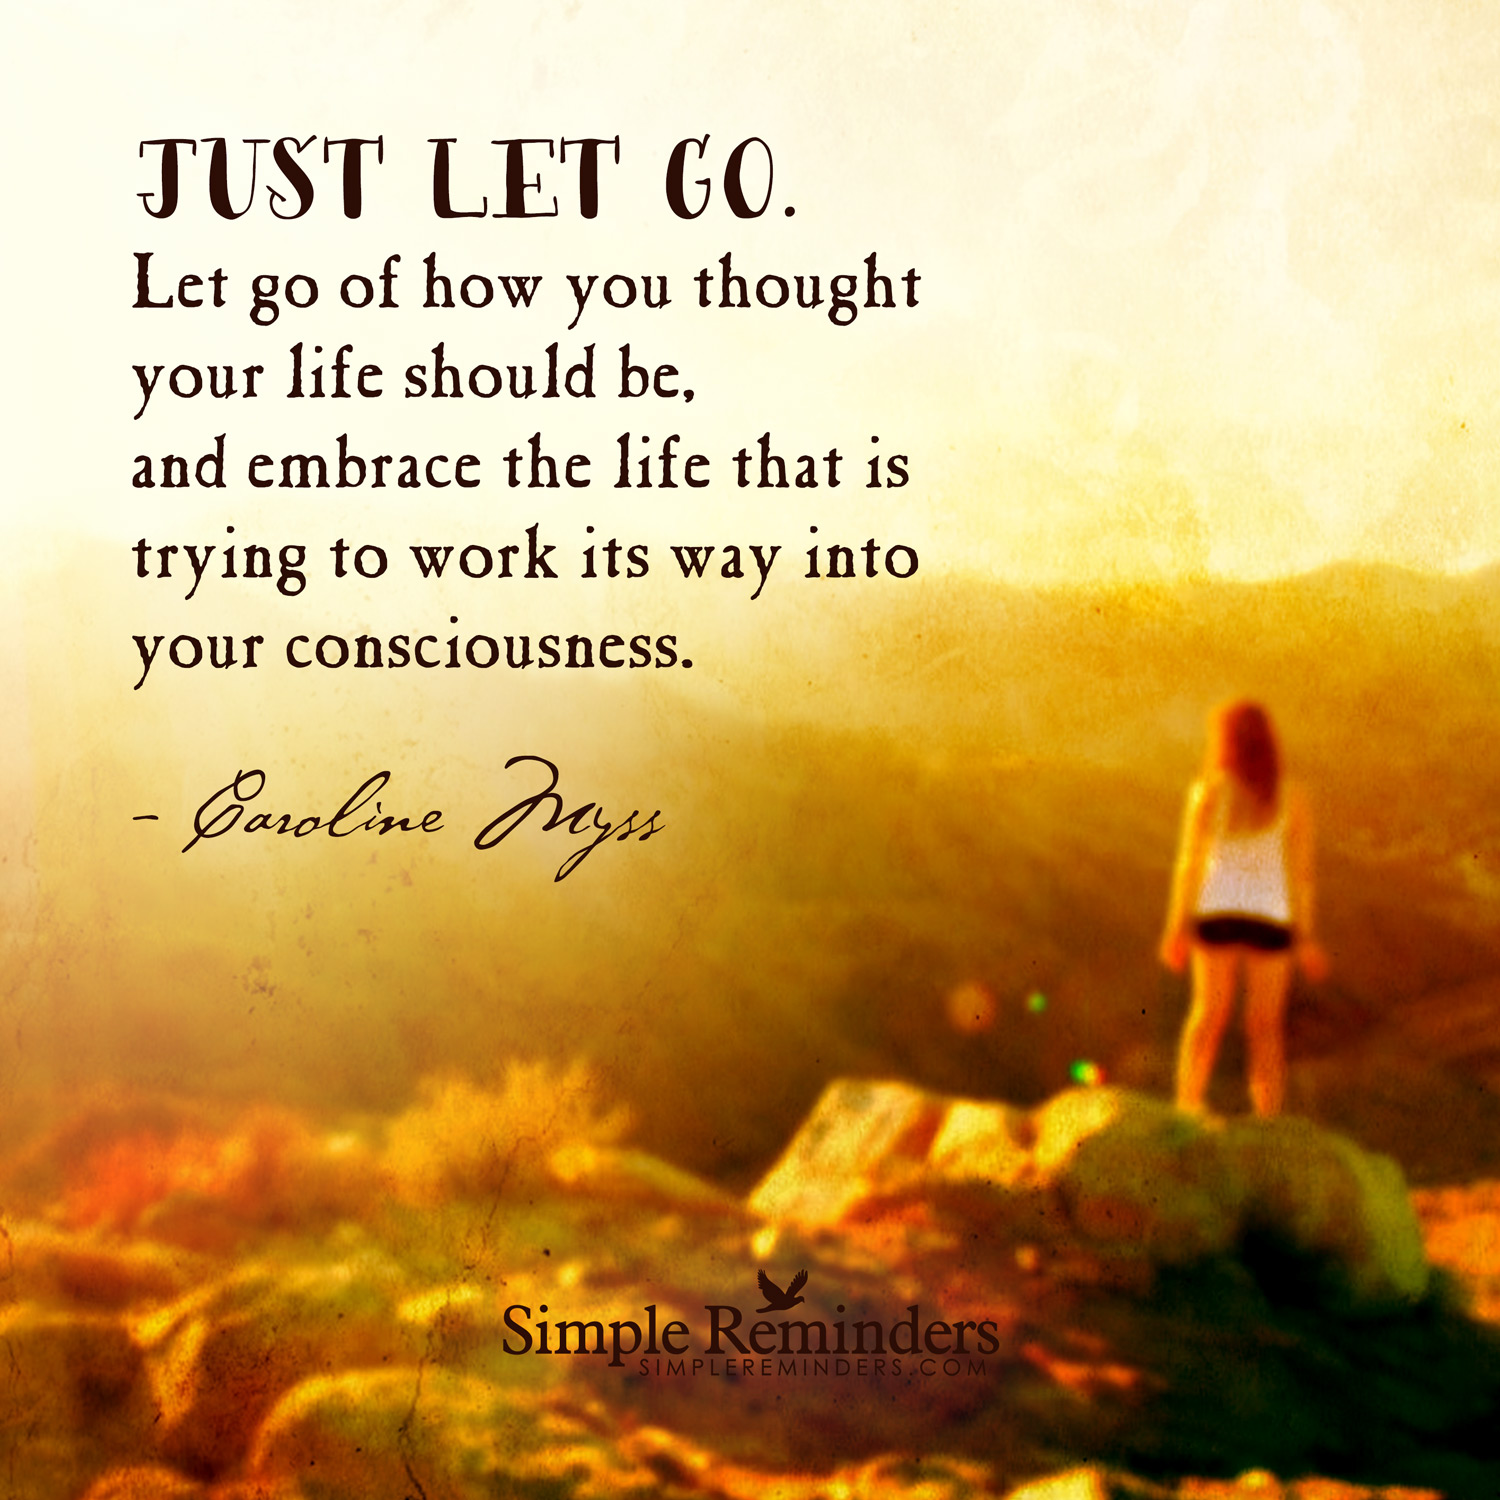 What life should be. How to Let go. Just Let go". Embrace all that is you. Let it go just Let it be.